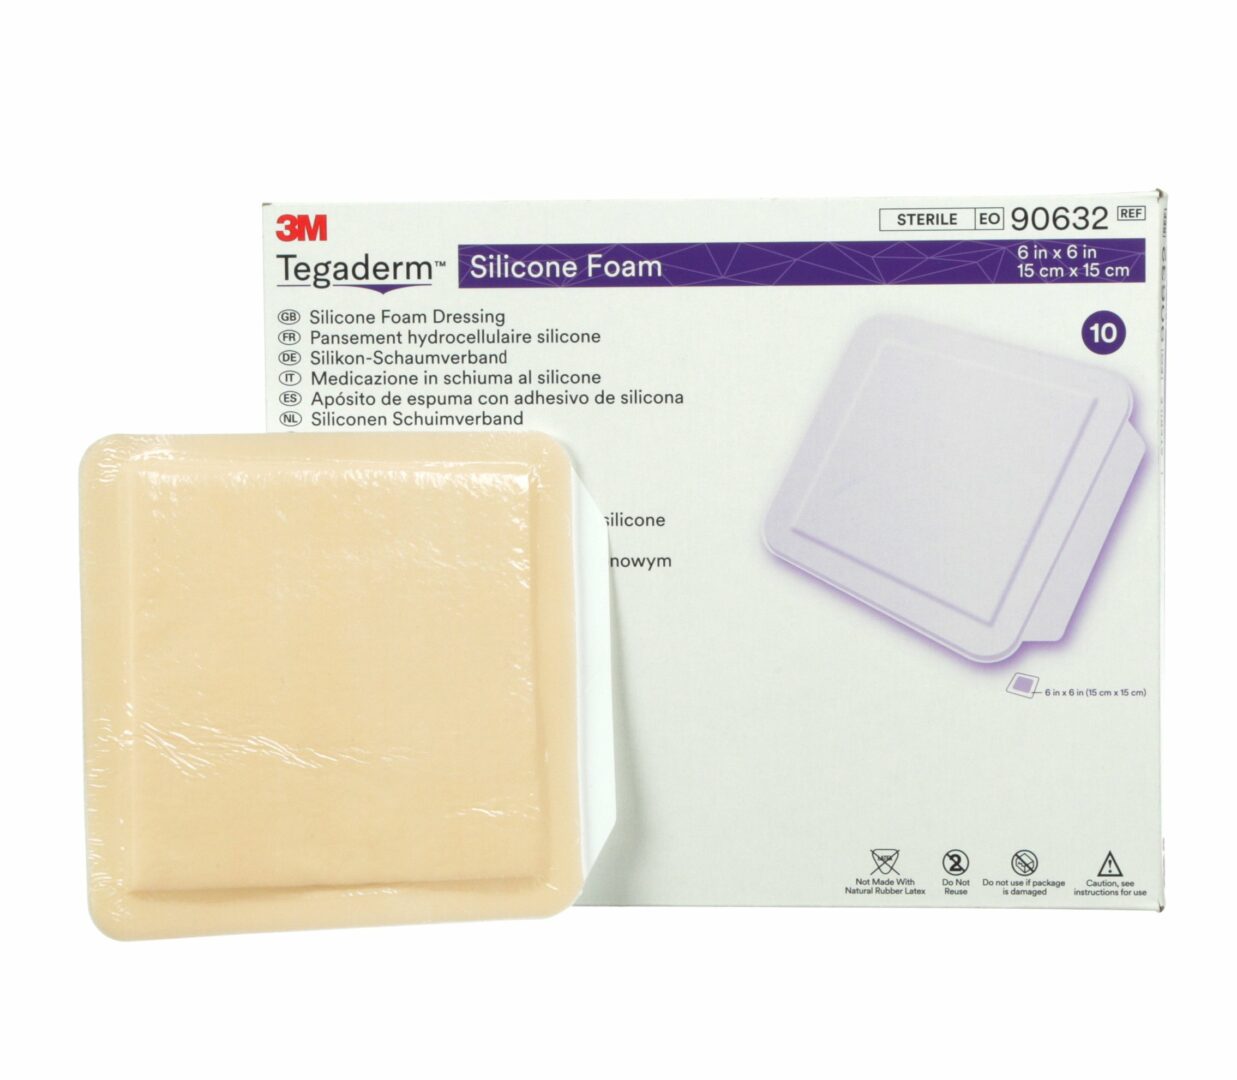 3M  Silicone Foam Dressing 3M Tegaderm 4 X 4-1/4 Inch Square Silicone Adhesive Without Border Sterile